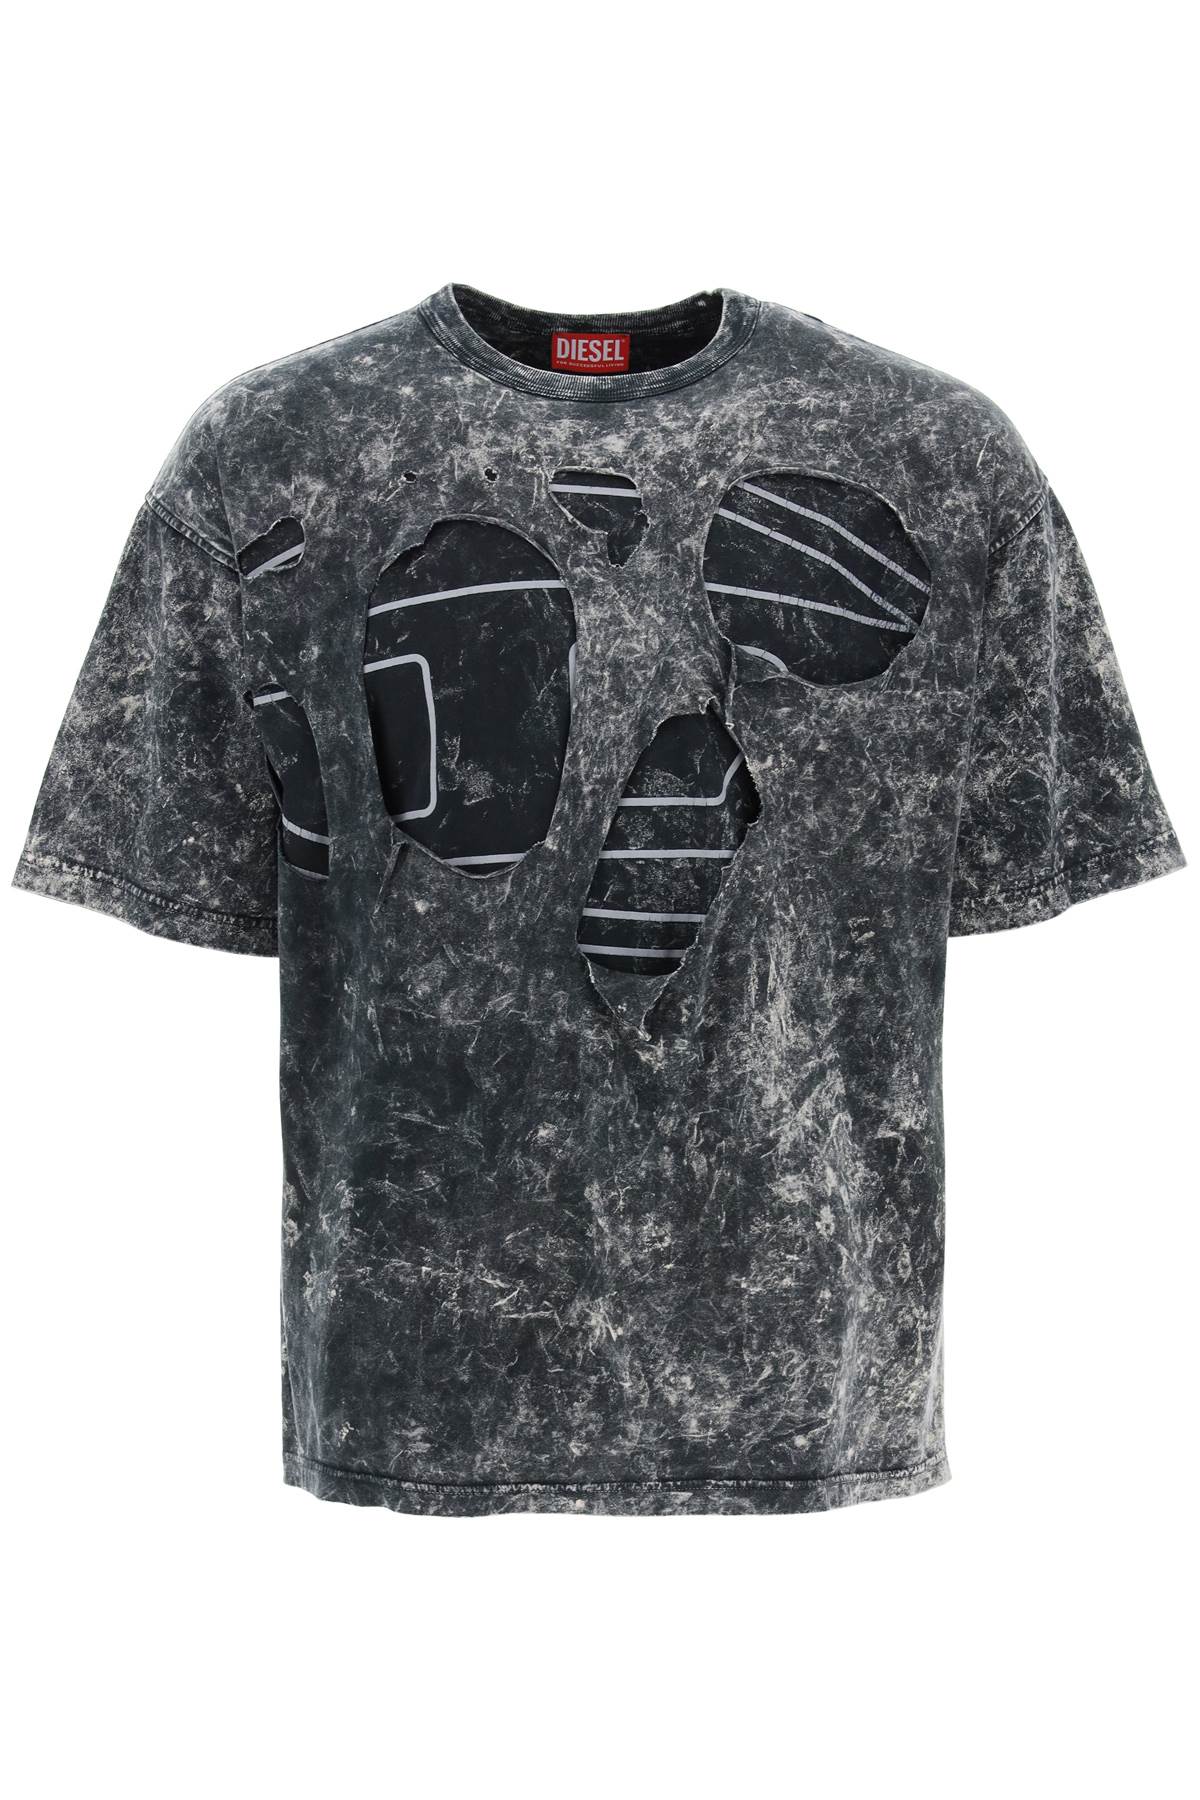 Diesel destroyed t-shirt with peel A13635 0DQAM DP BLACK